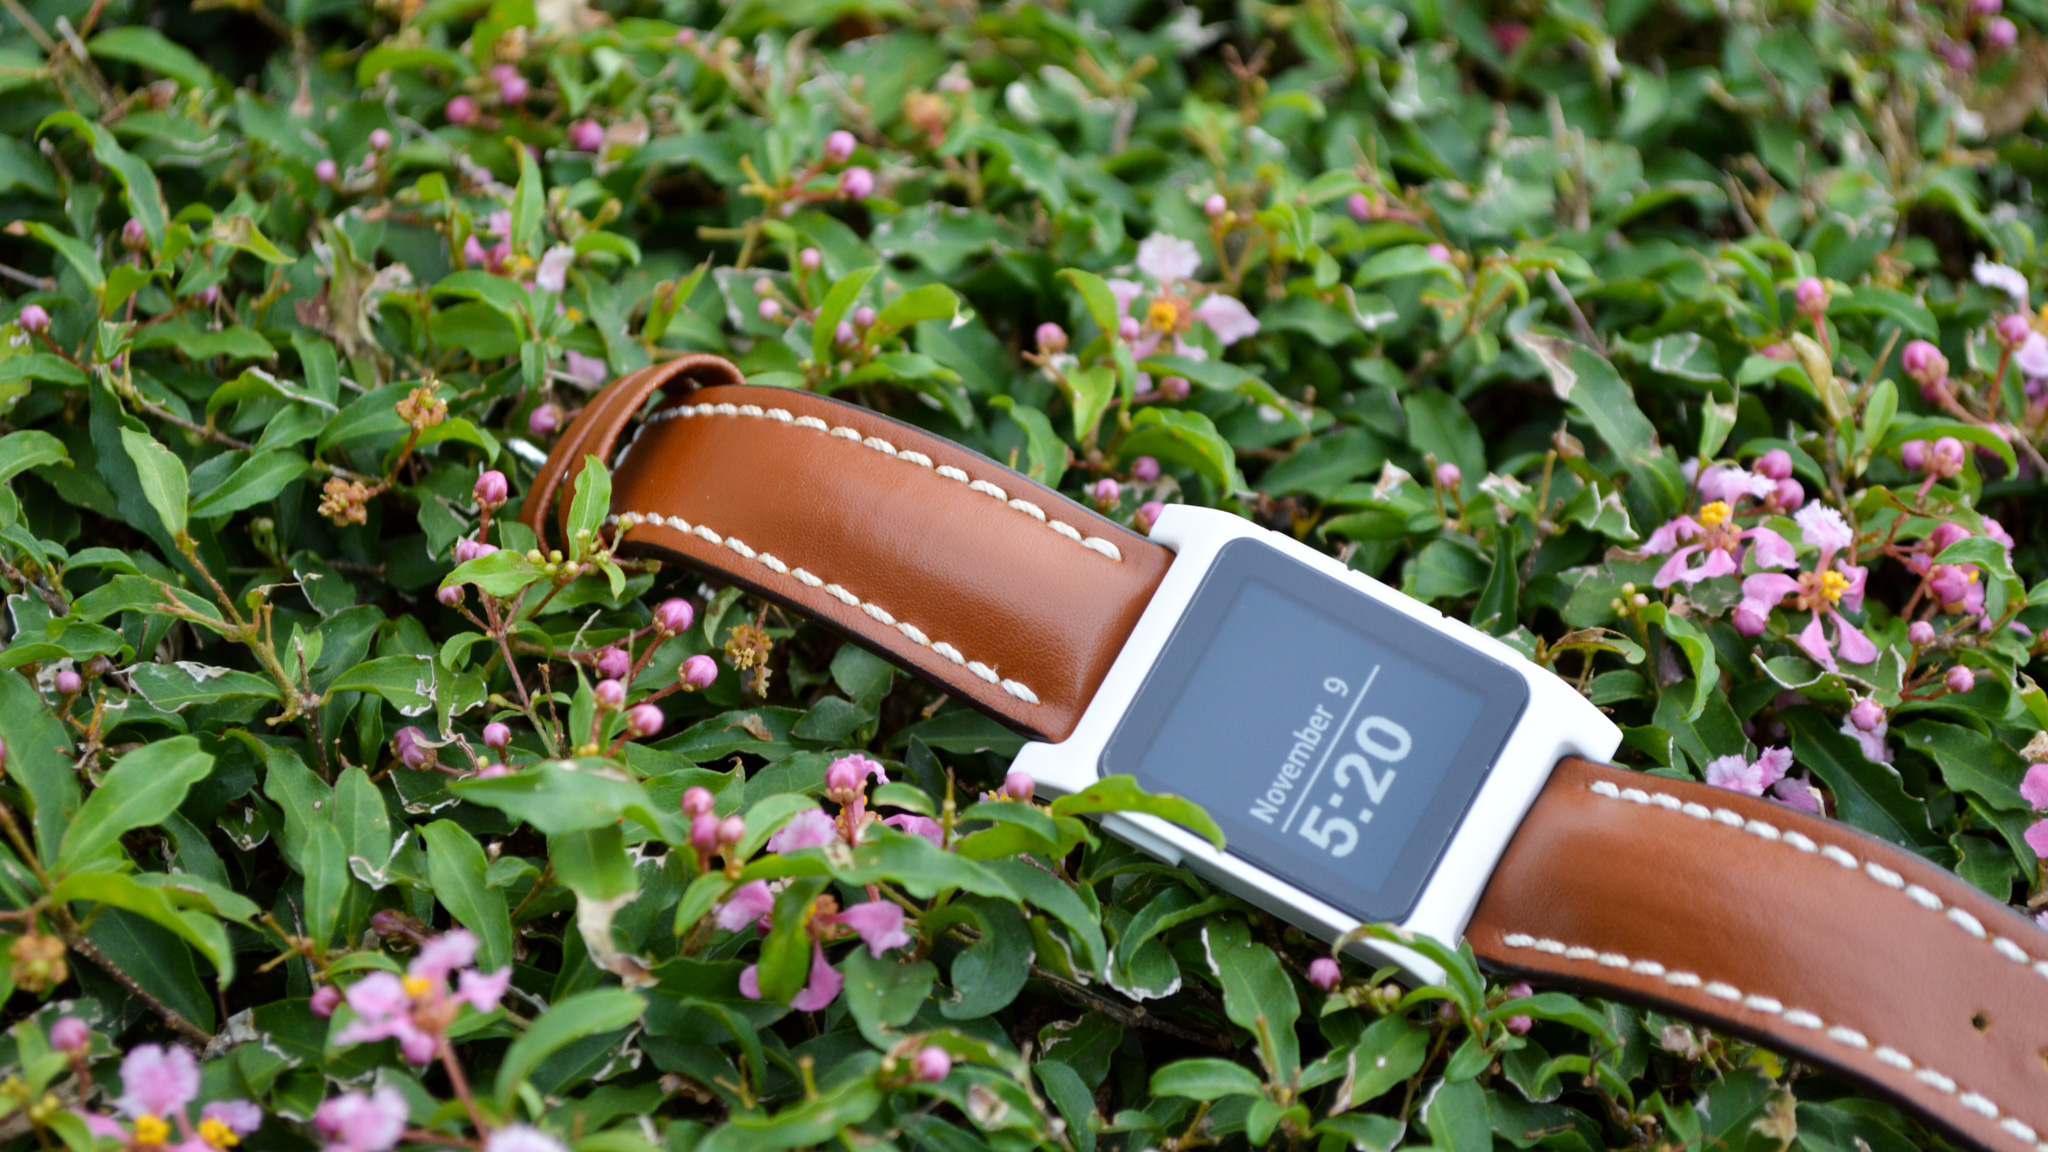 The Best Pebble 2 Watch Bands | Hirsch Leather Watch Band